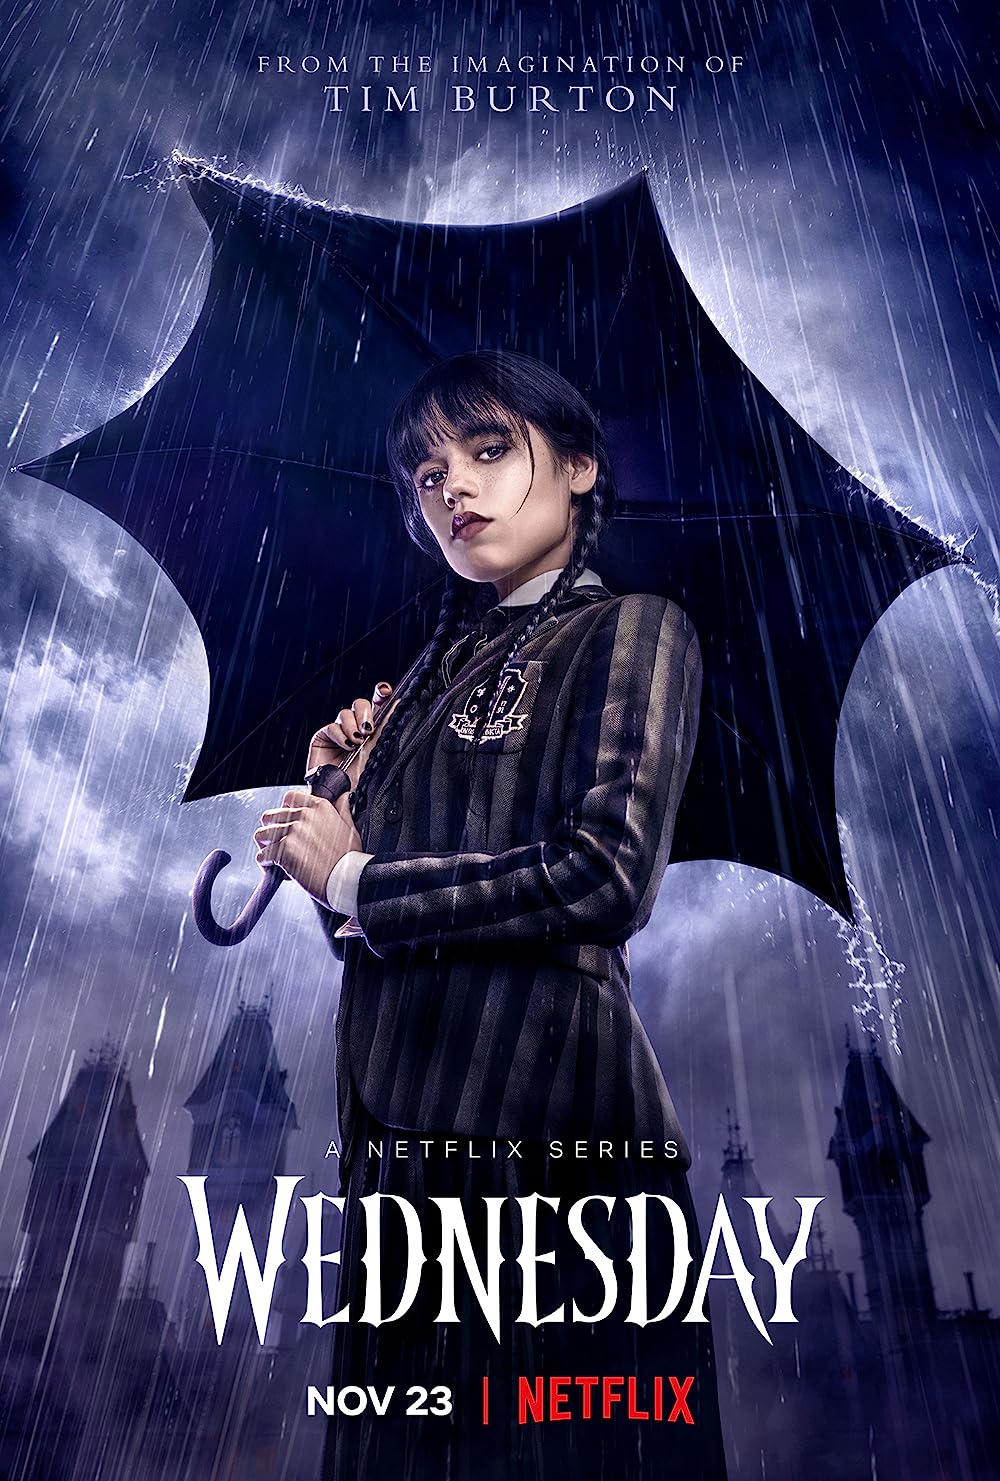 Wednesday - At Nevermore Academy, Wednesday Addams finds herself amidst a whirlwind of challenges and mysteries